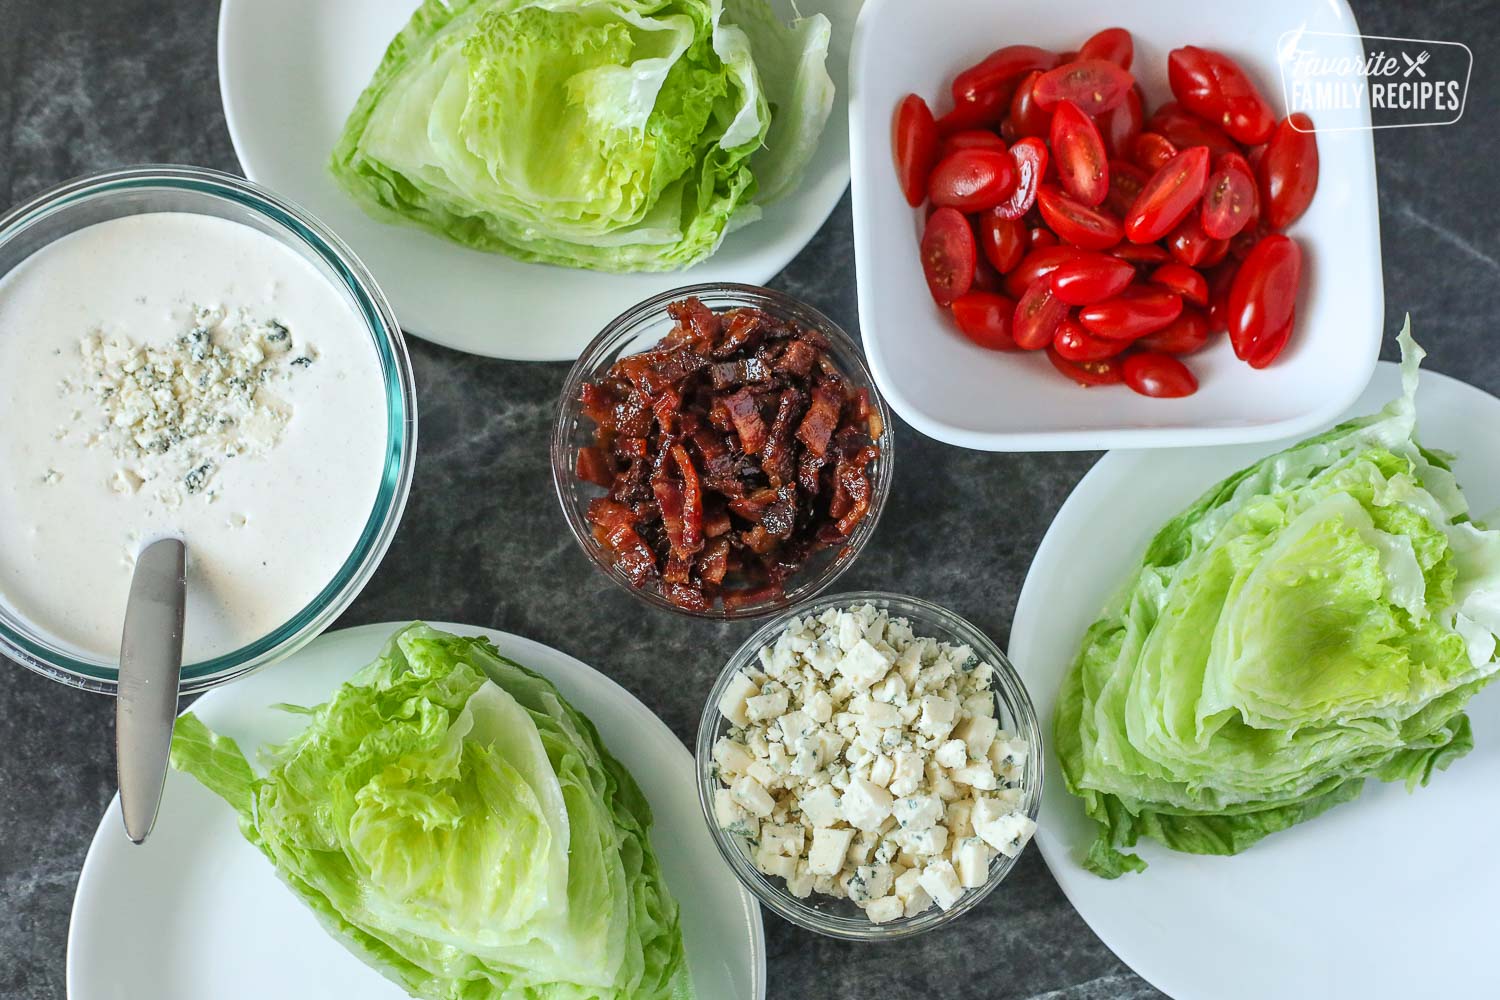 Overhead shot of Ingredients for Wedge Salads